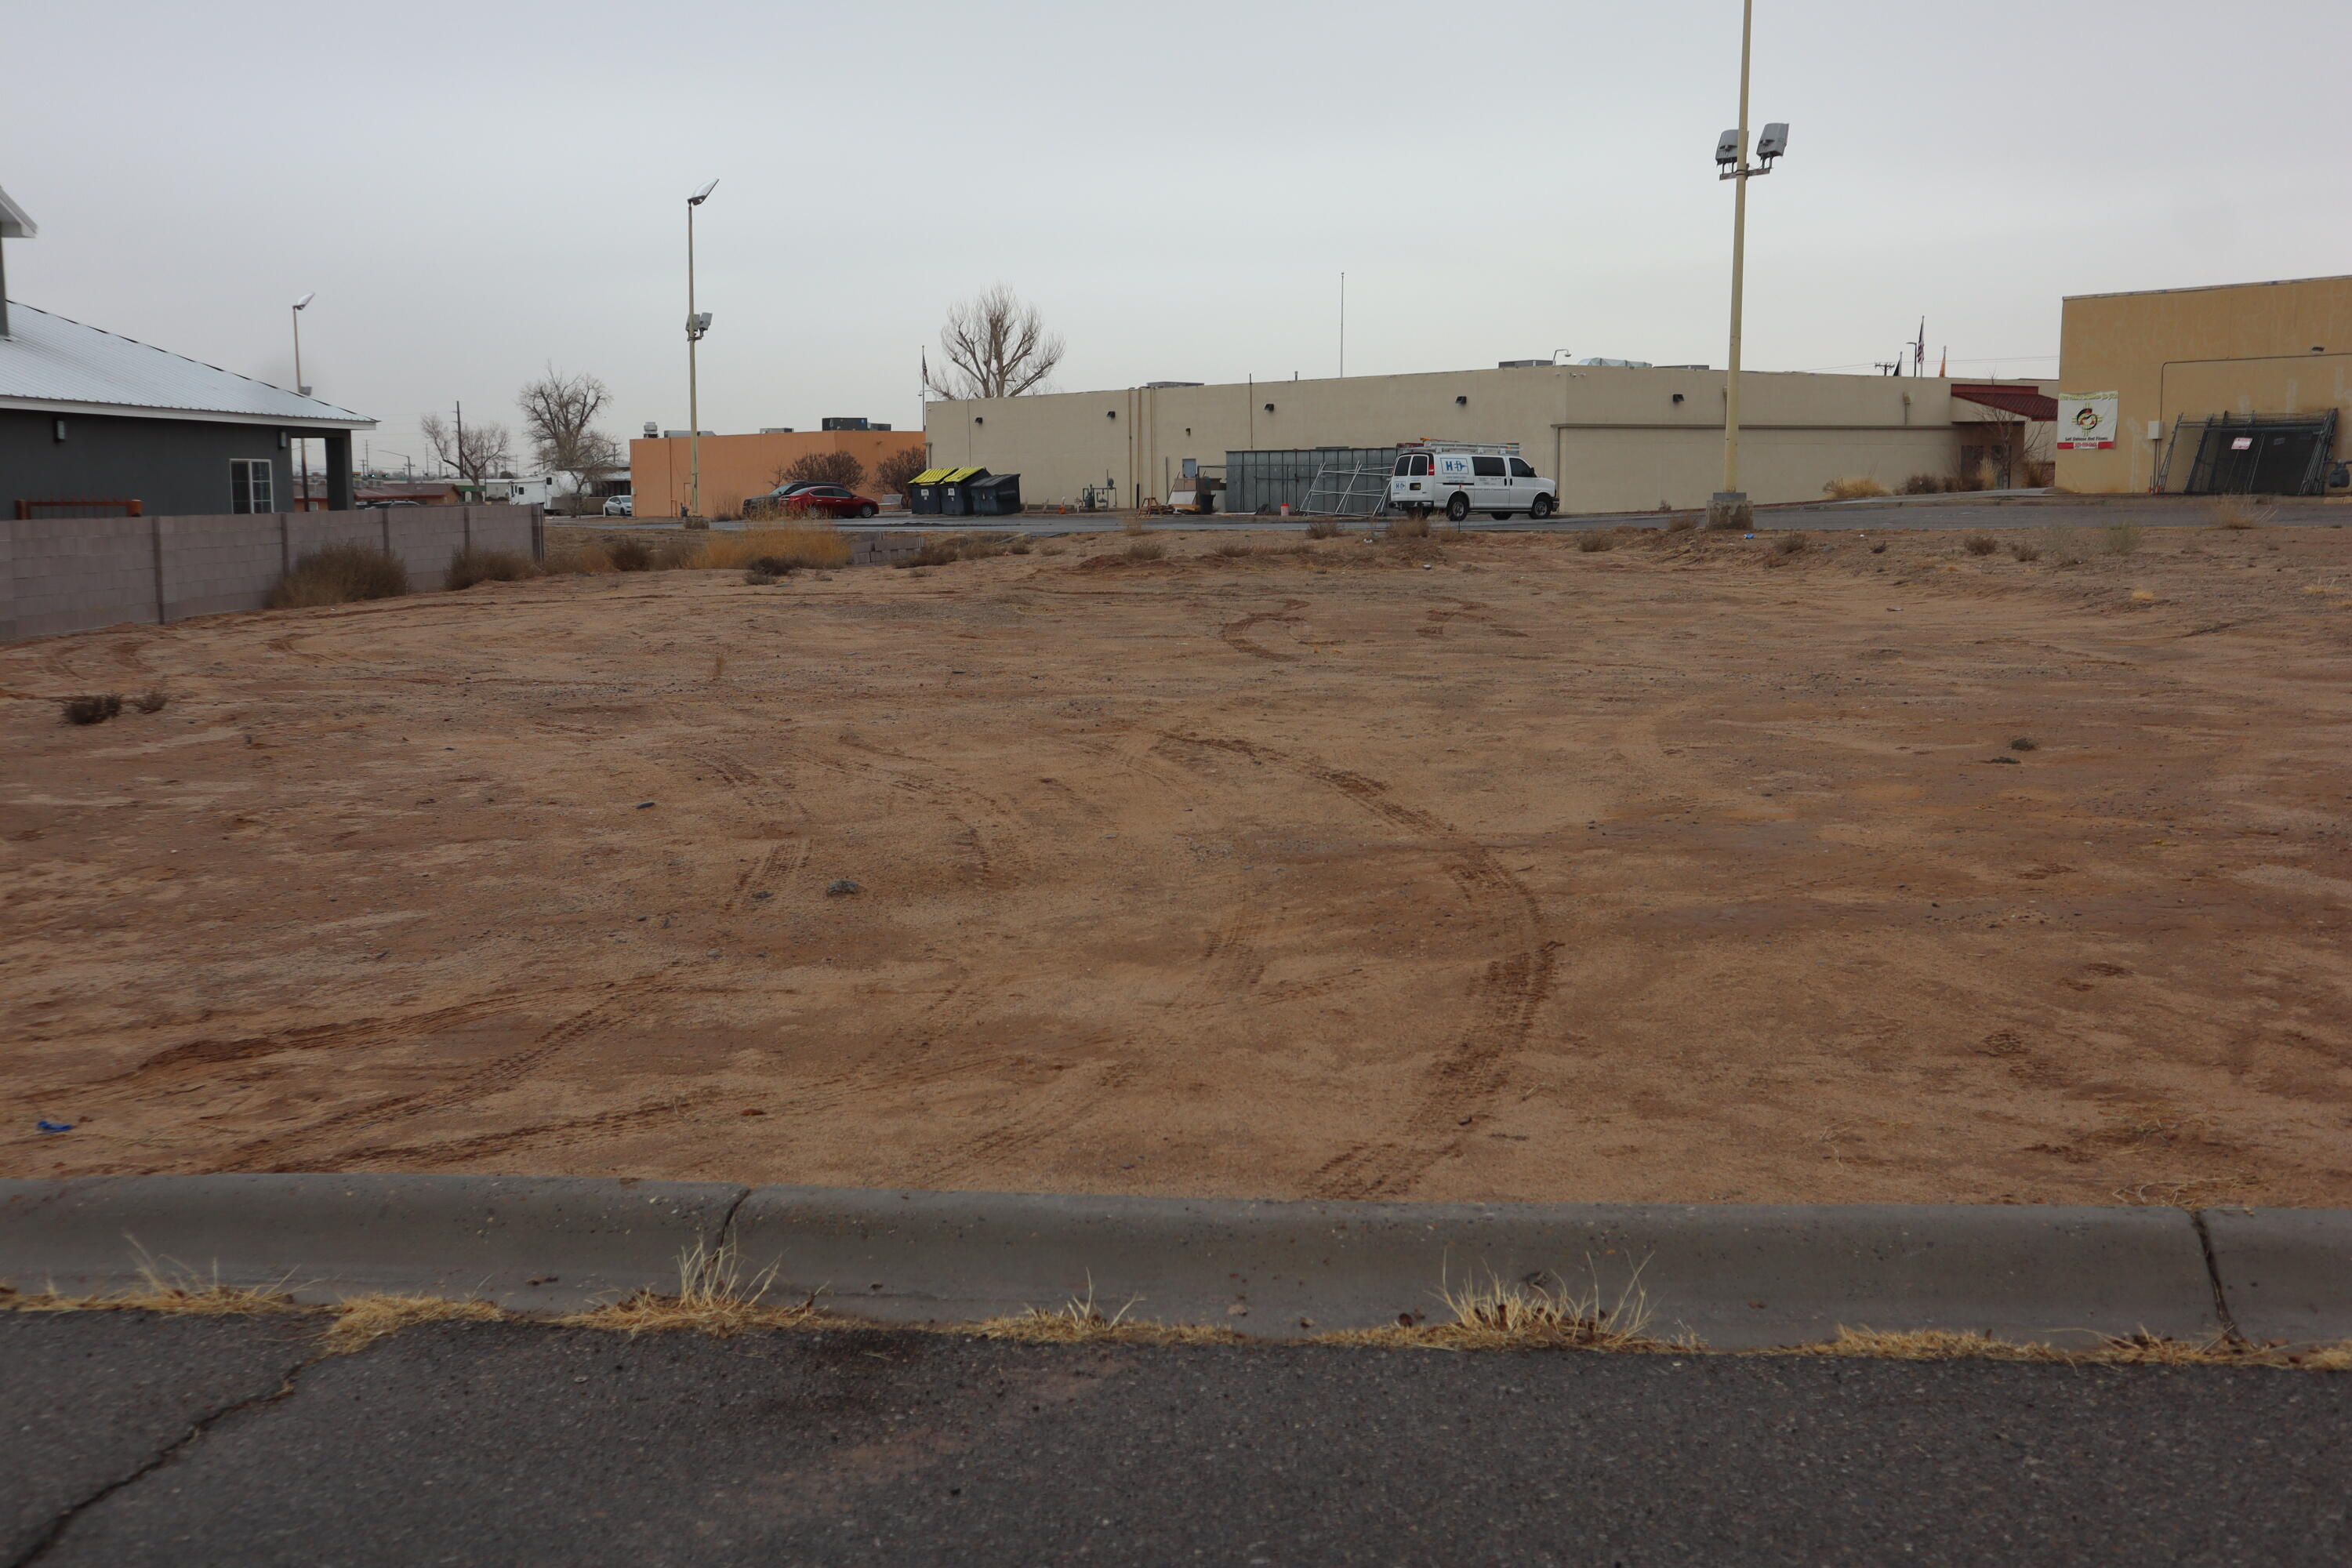 Lot 18-A, Rio Communities, New Mexico 87002, ,Land,For Sale, Lot 18-A,1054586